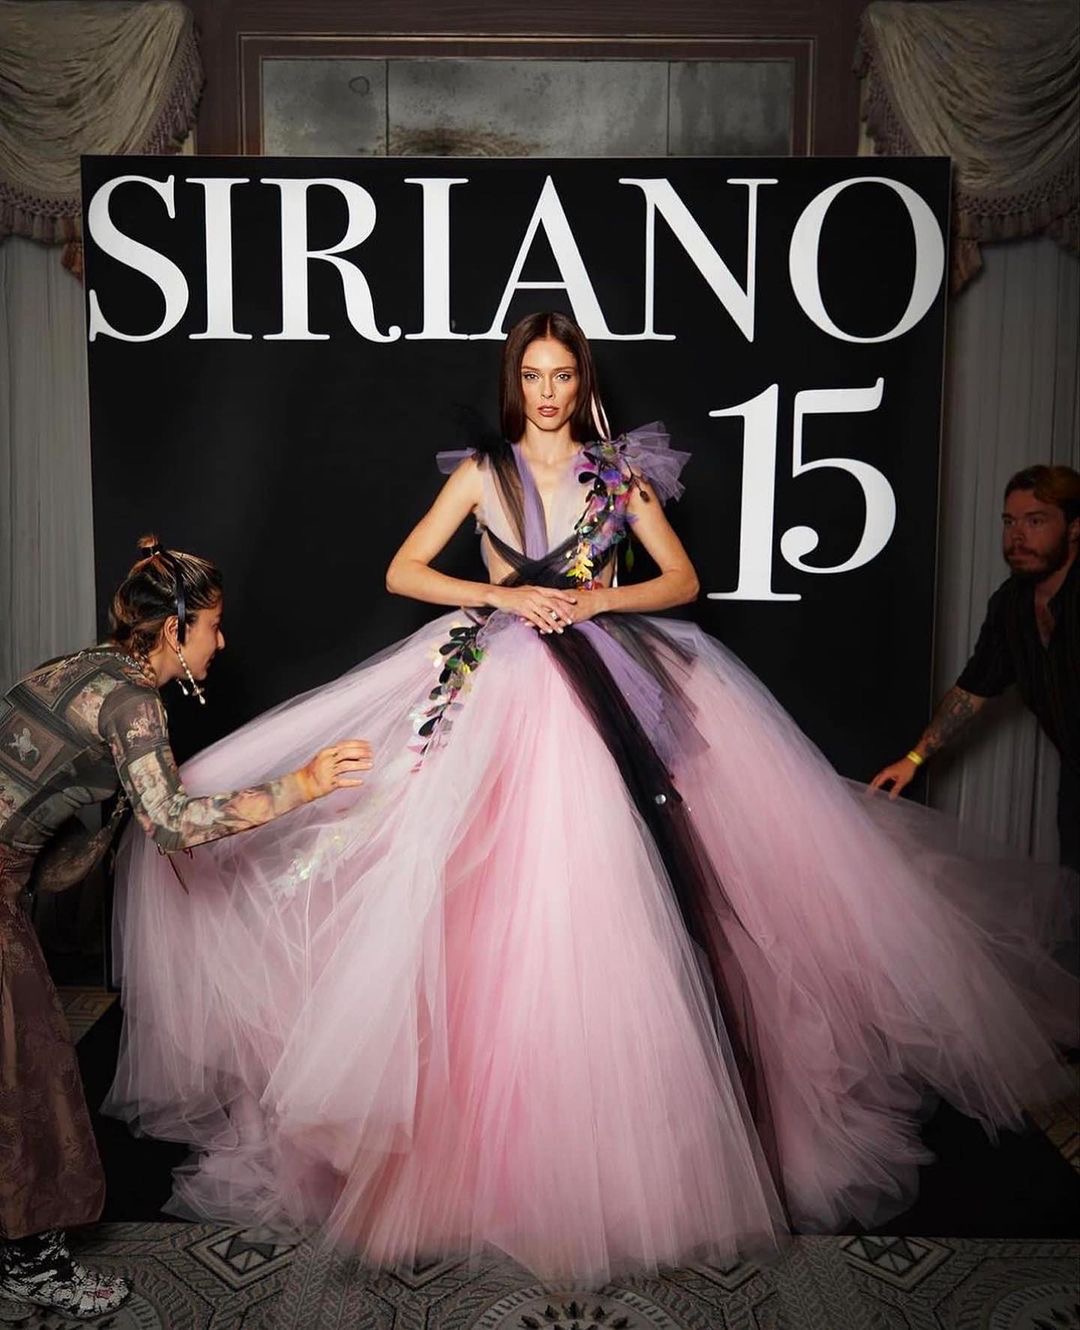 Christian Siriano Celebrated His 15th Anniversary at New York Fashion Week with Bold and Modern Ballerina Silhouettes 1